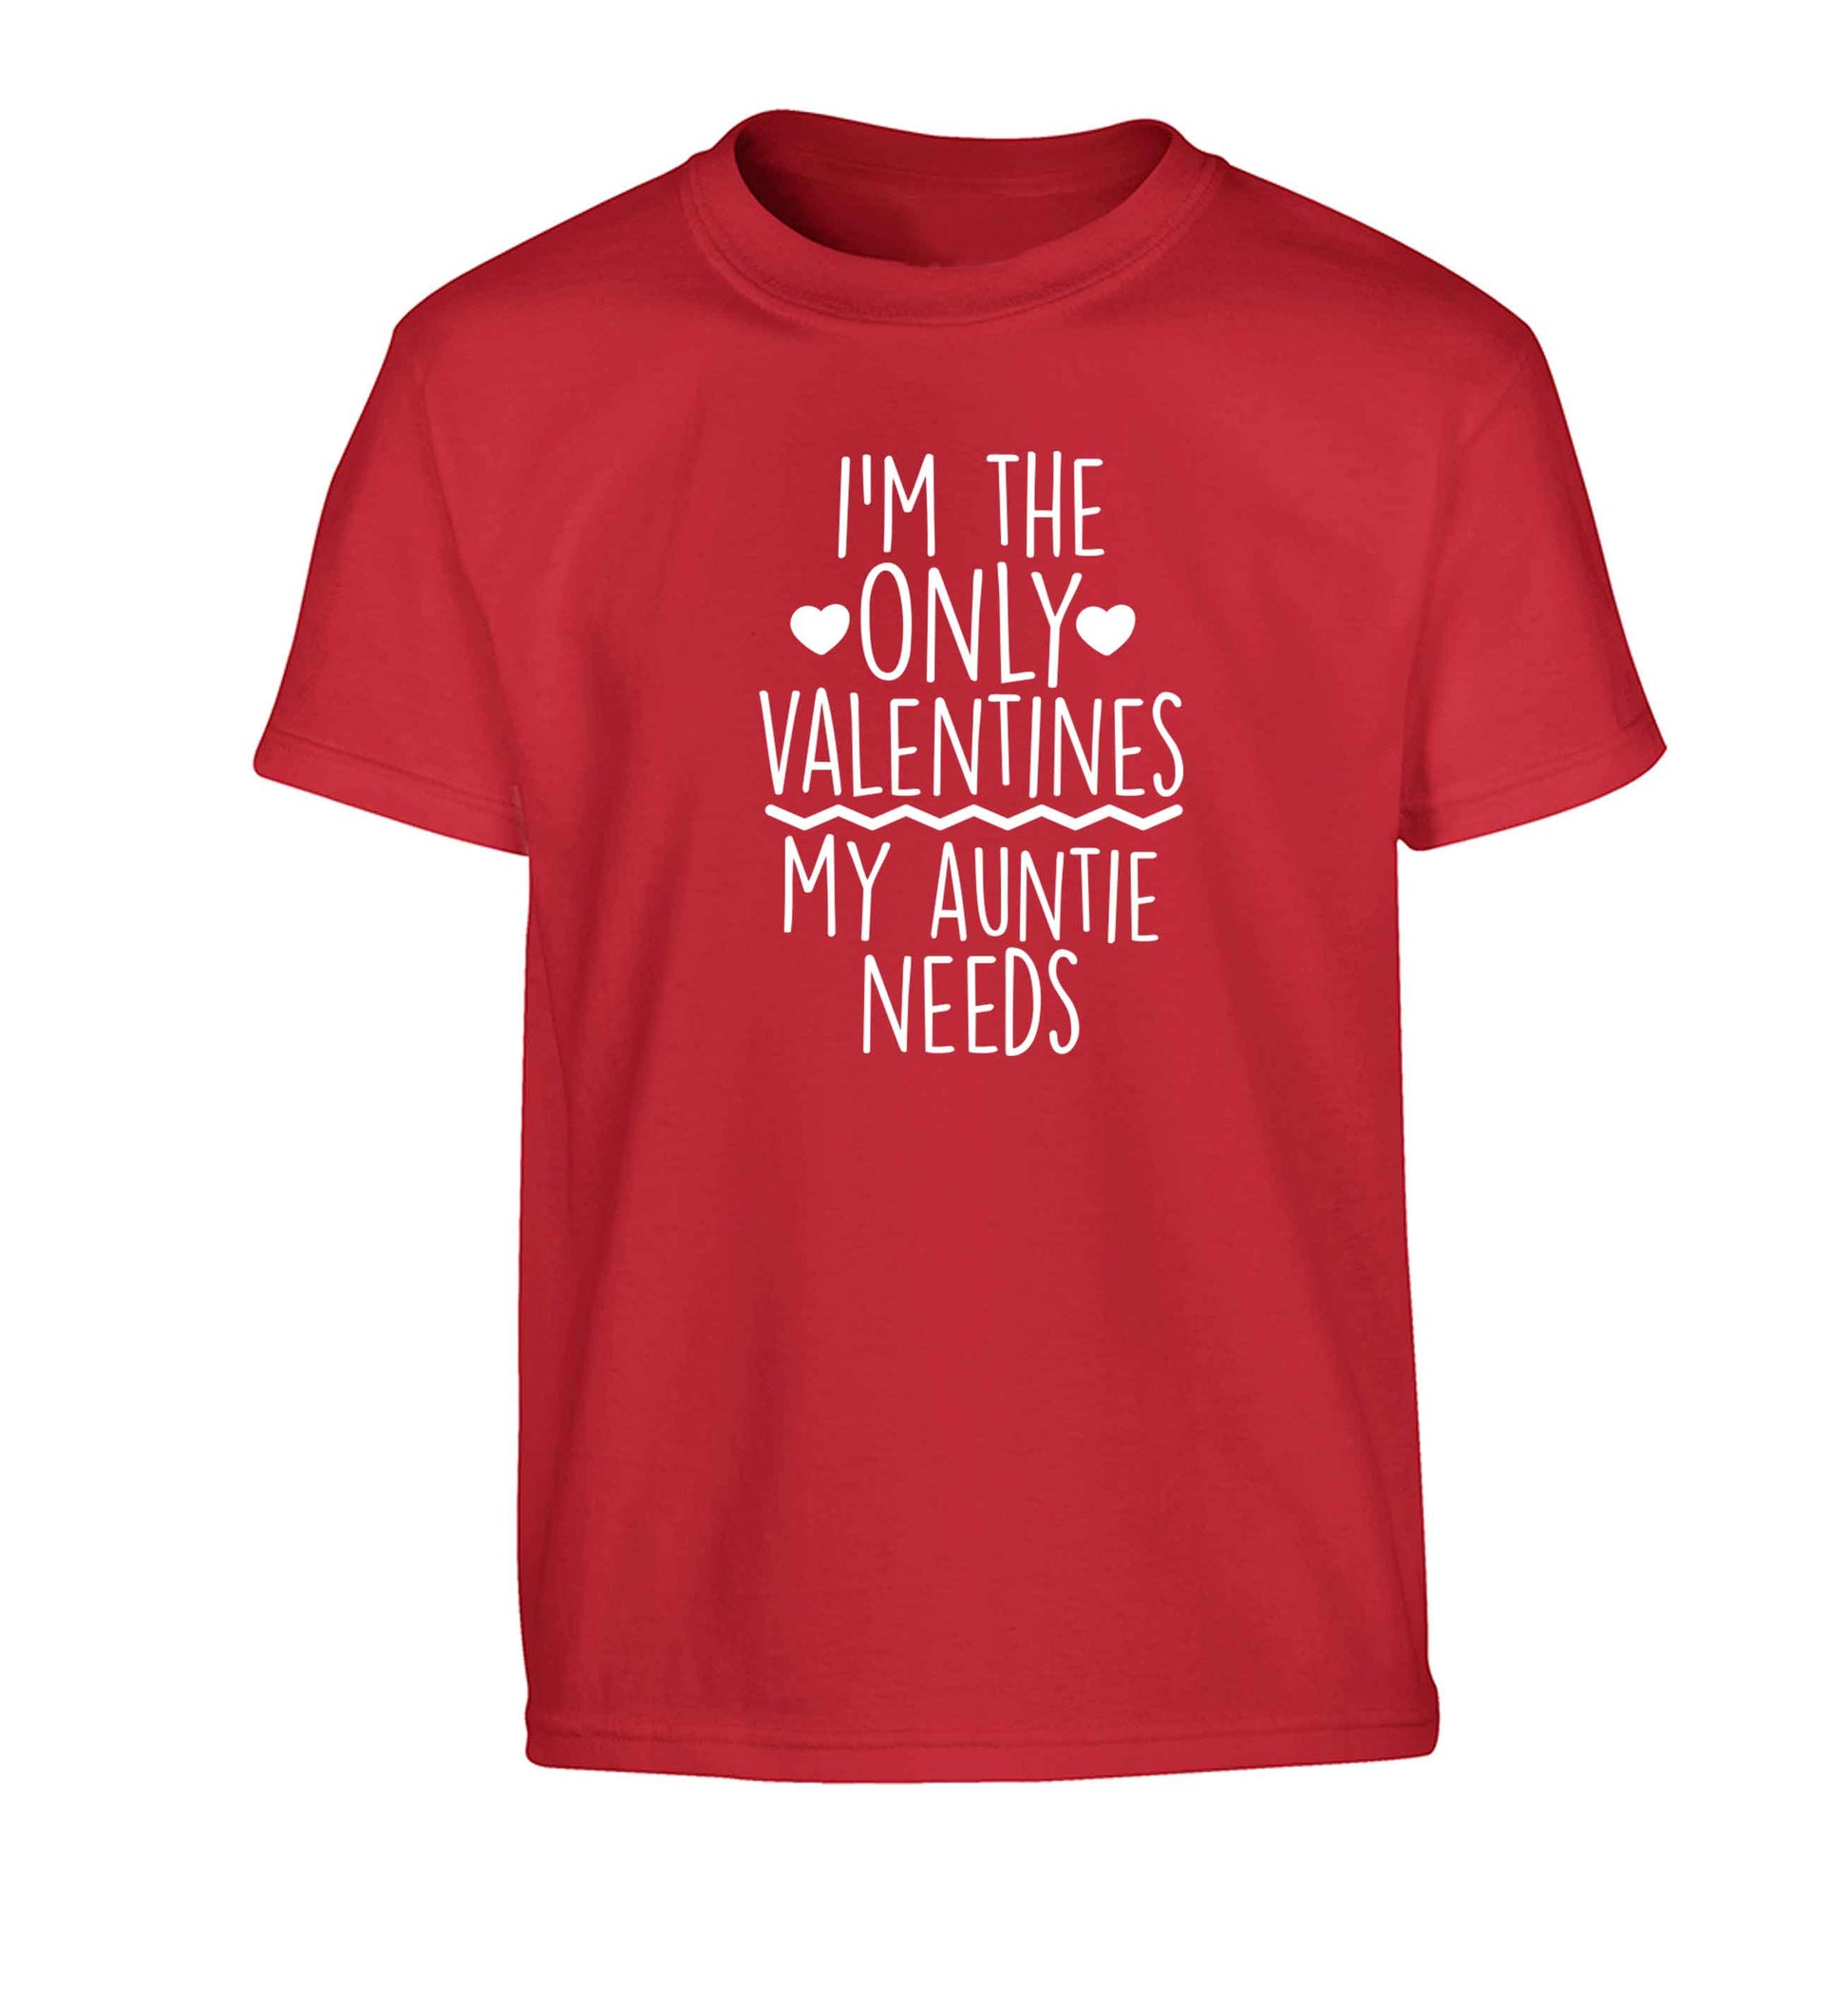 I'm the only valentines my auntie needs Children's red Tshirt 12-13 Years